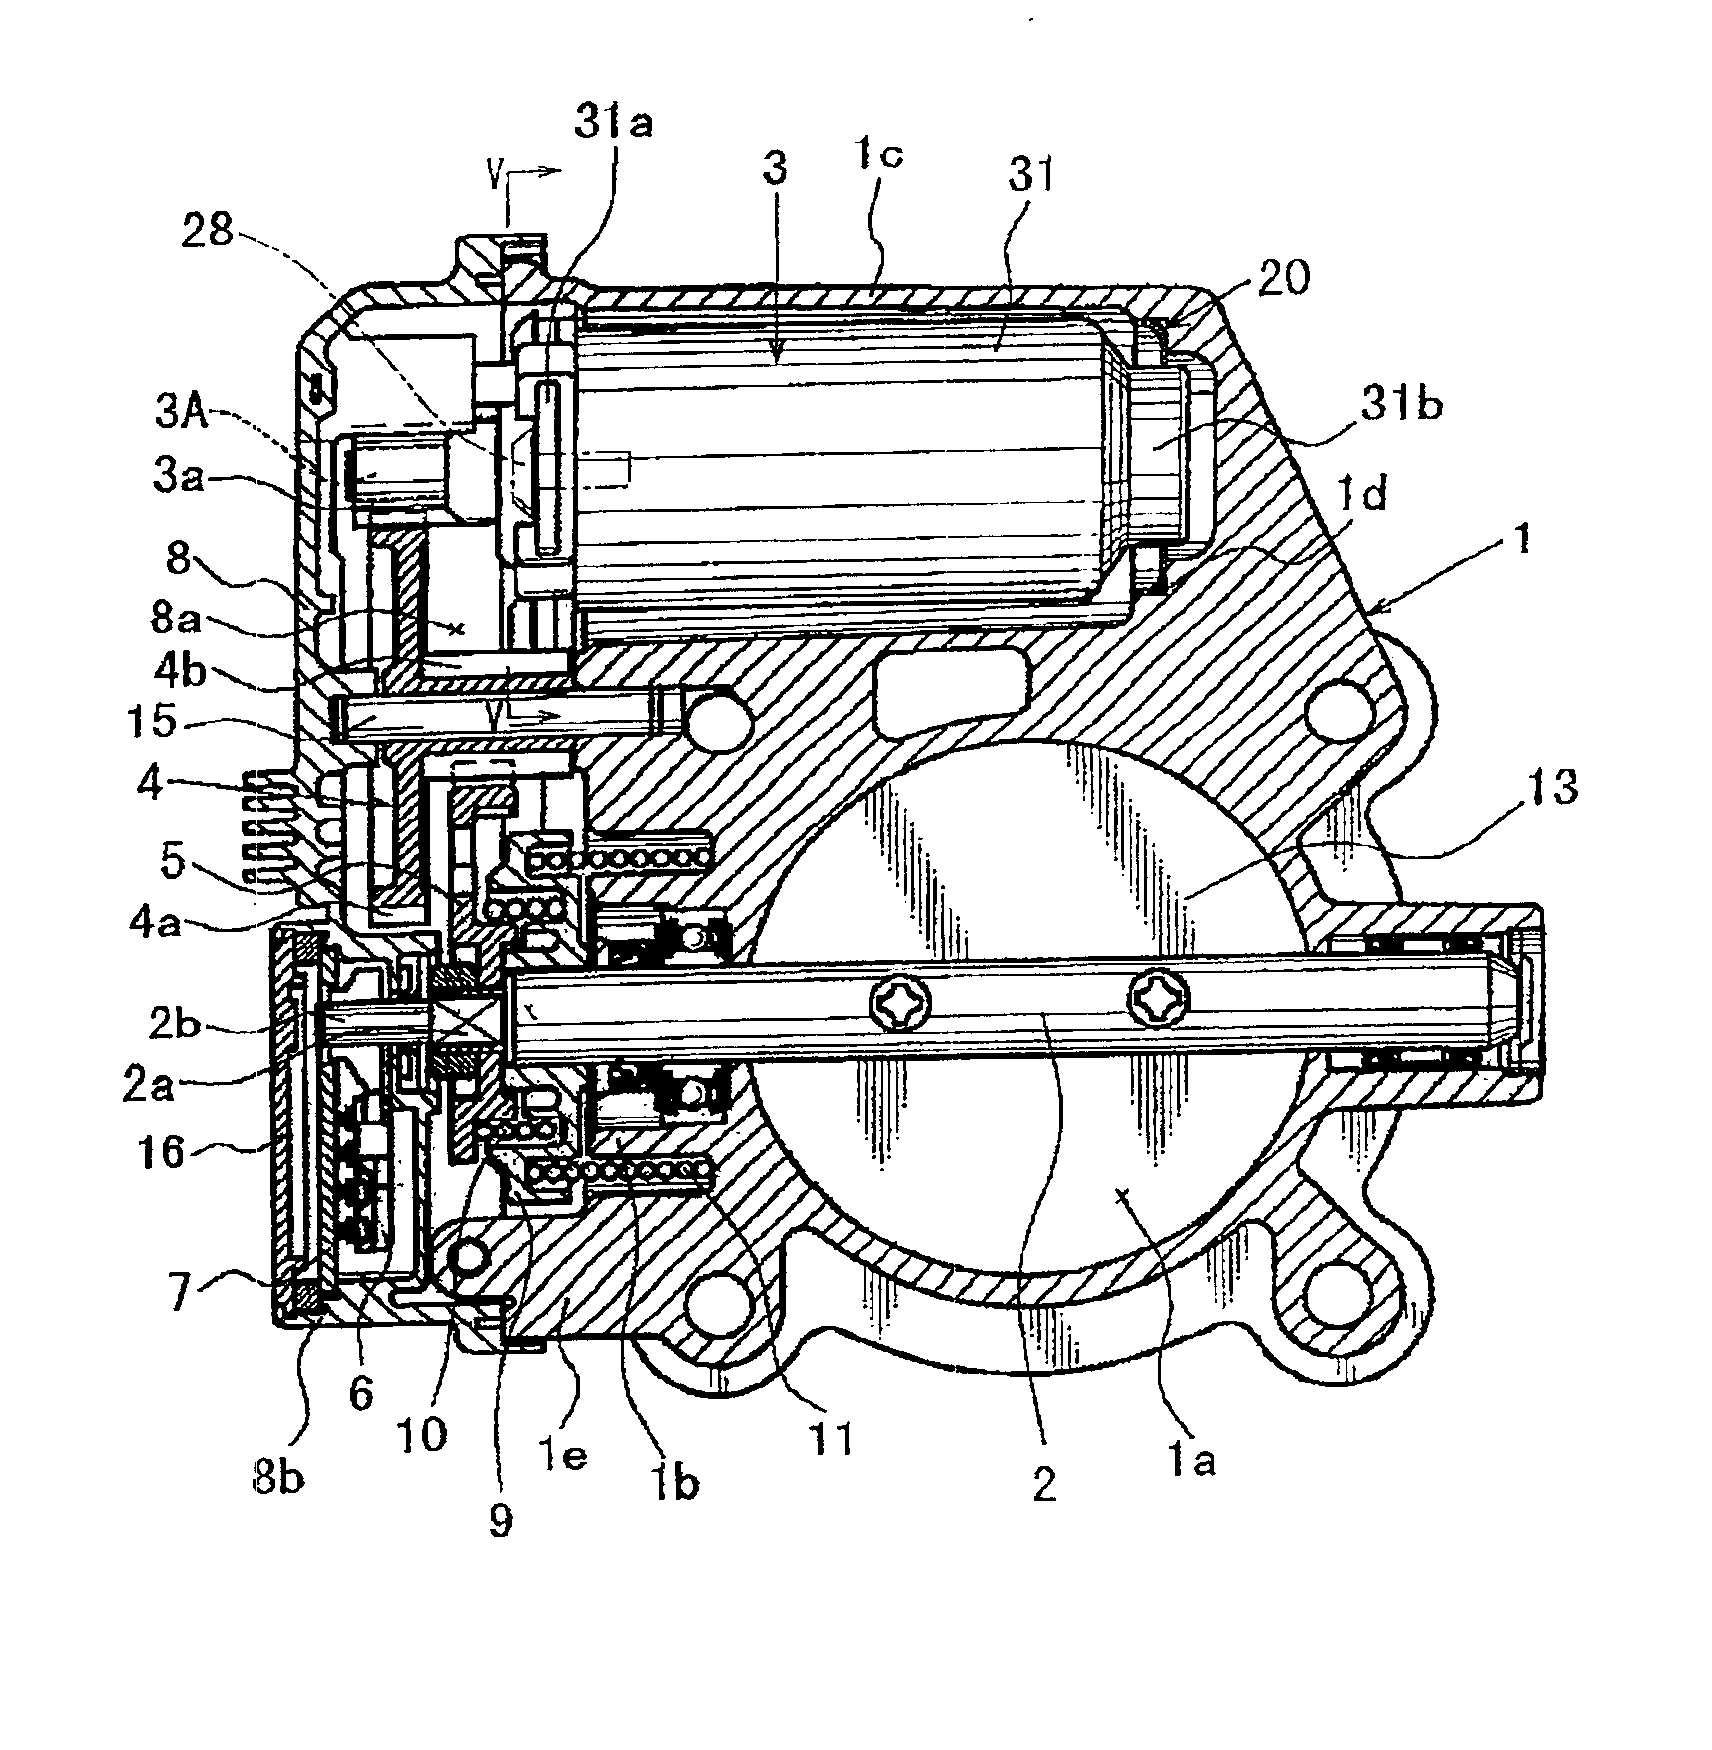 Throttle devices having motors supported by elastic, metallic support members